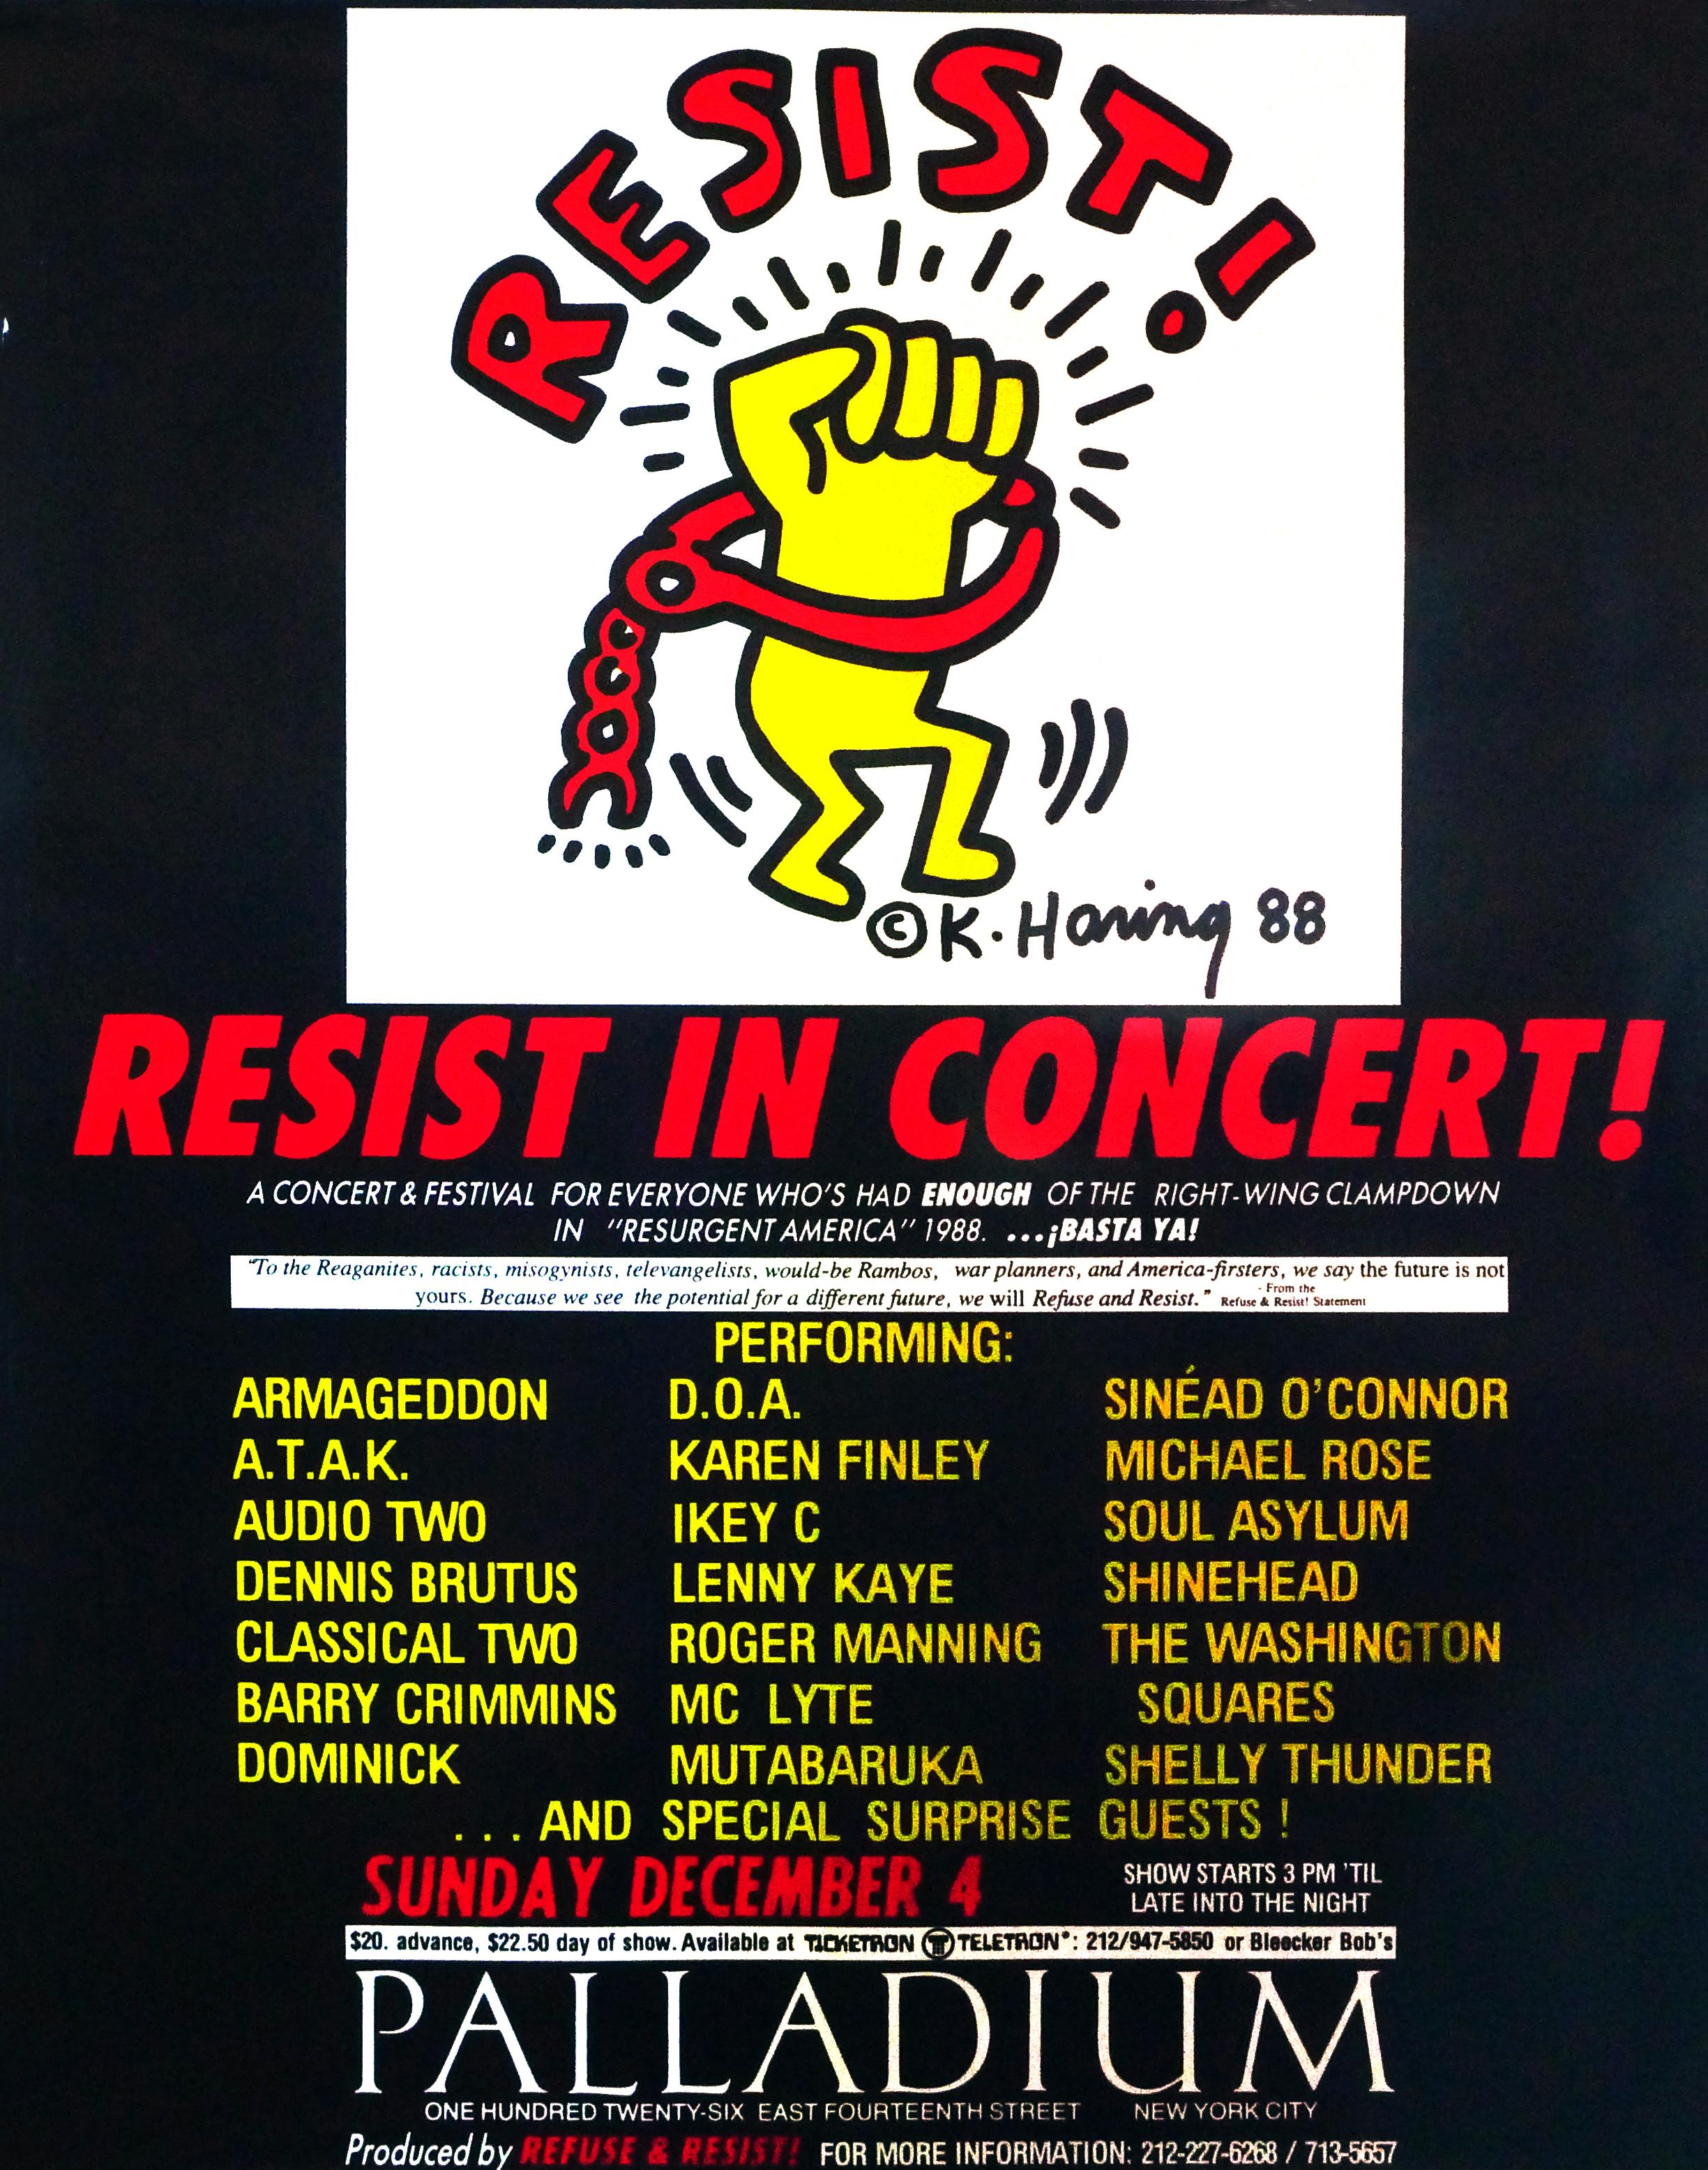 Keith Haring Resist in Concert! 1988: 
This rare poster was designed and illustrated by Keith Haring in 1988 for a Refuse and Resist produced concert December 4, 1988 at New York's Palladium nightclub. A rare Haring activist poster produced during